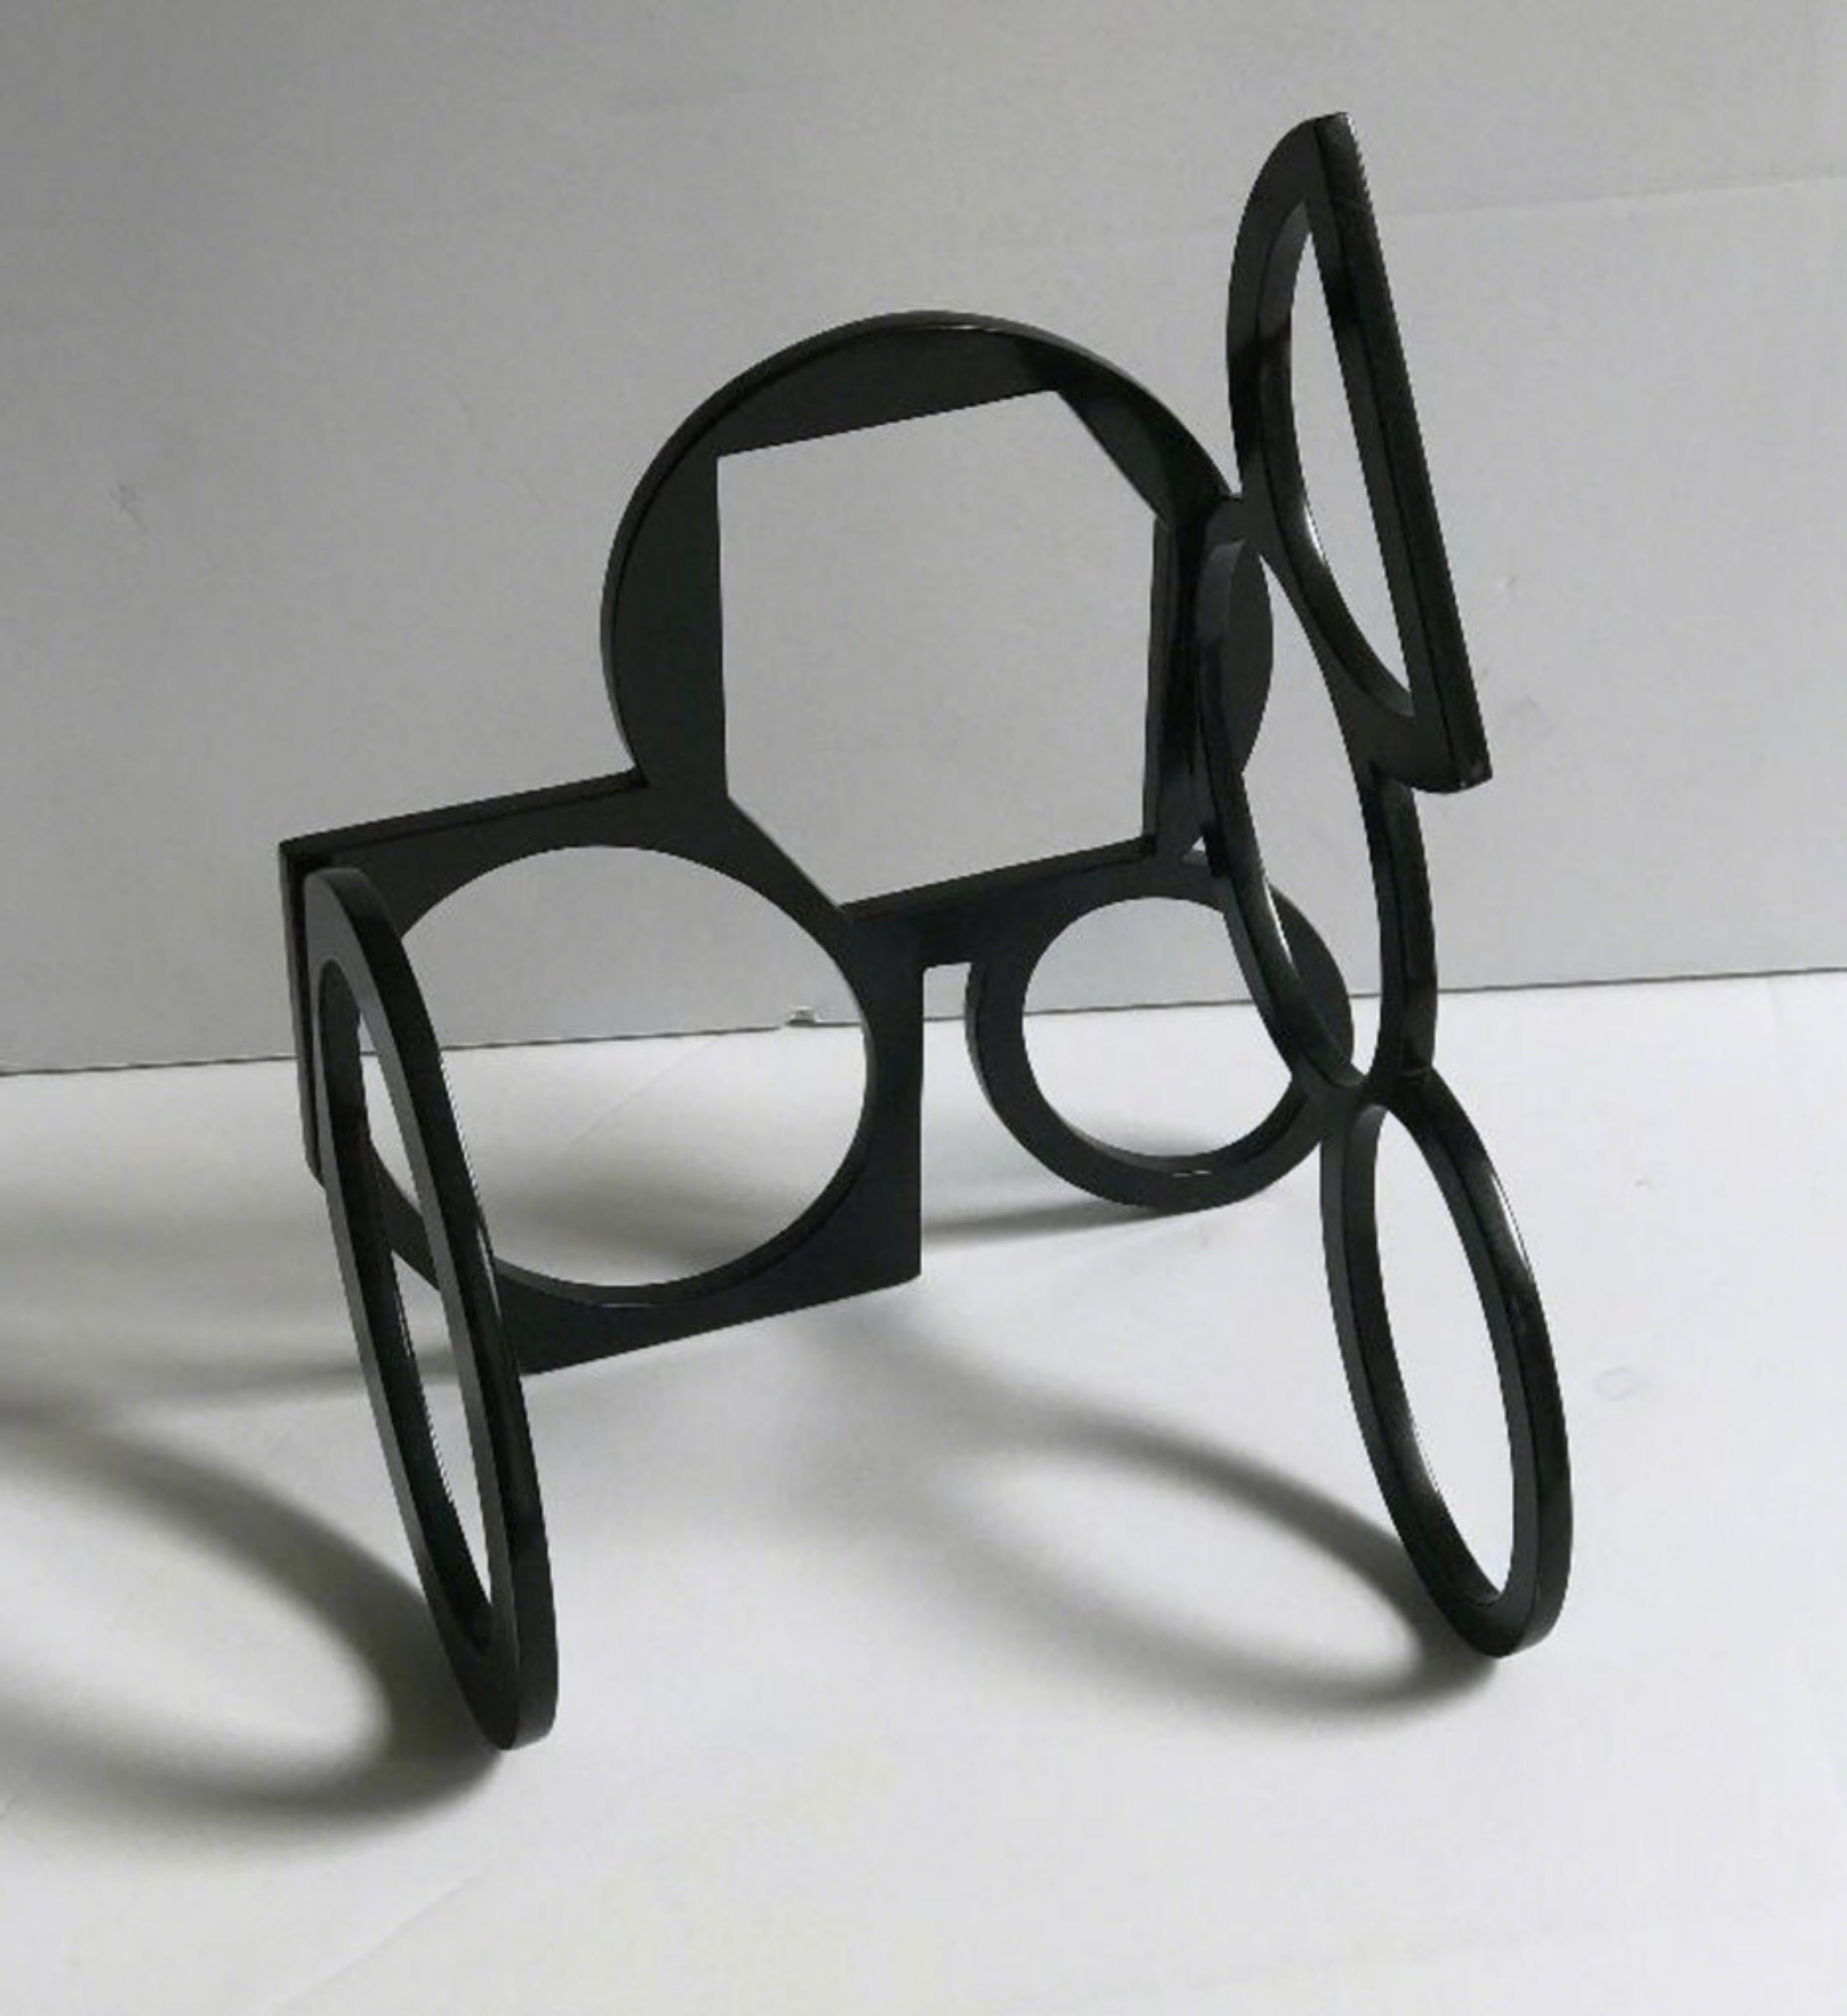 Rydbo Maquette, 1989-2000 - Sculpture by Nigel HALL